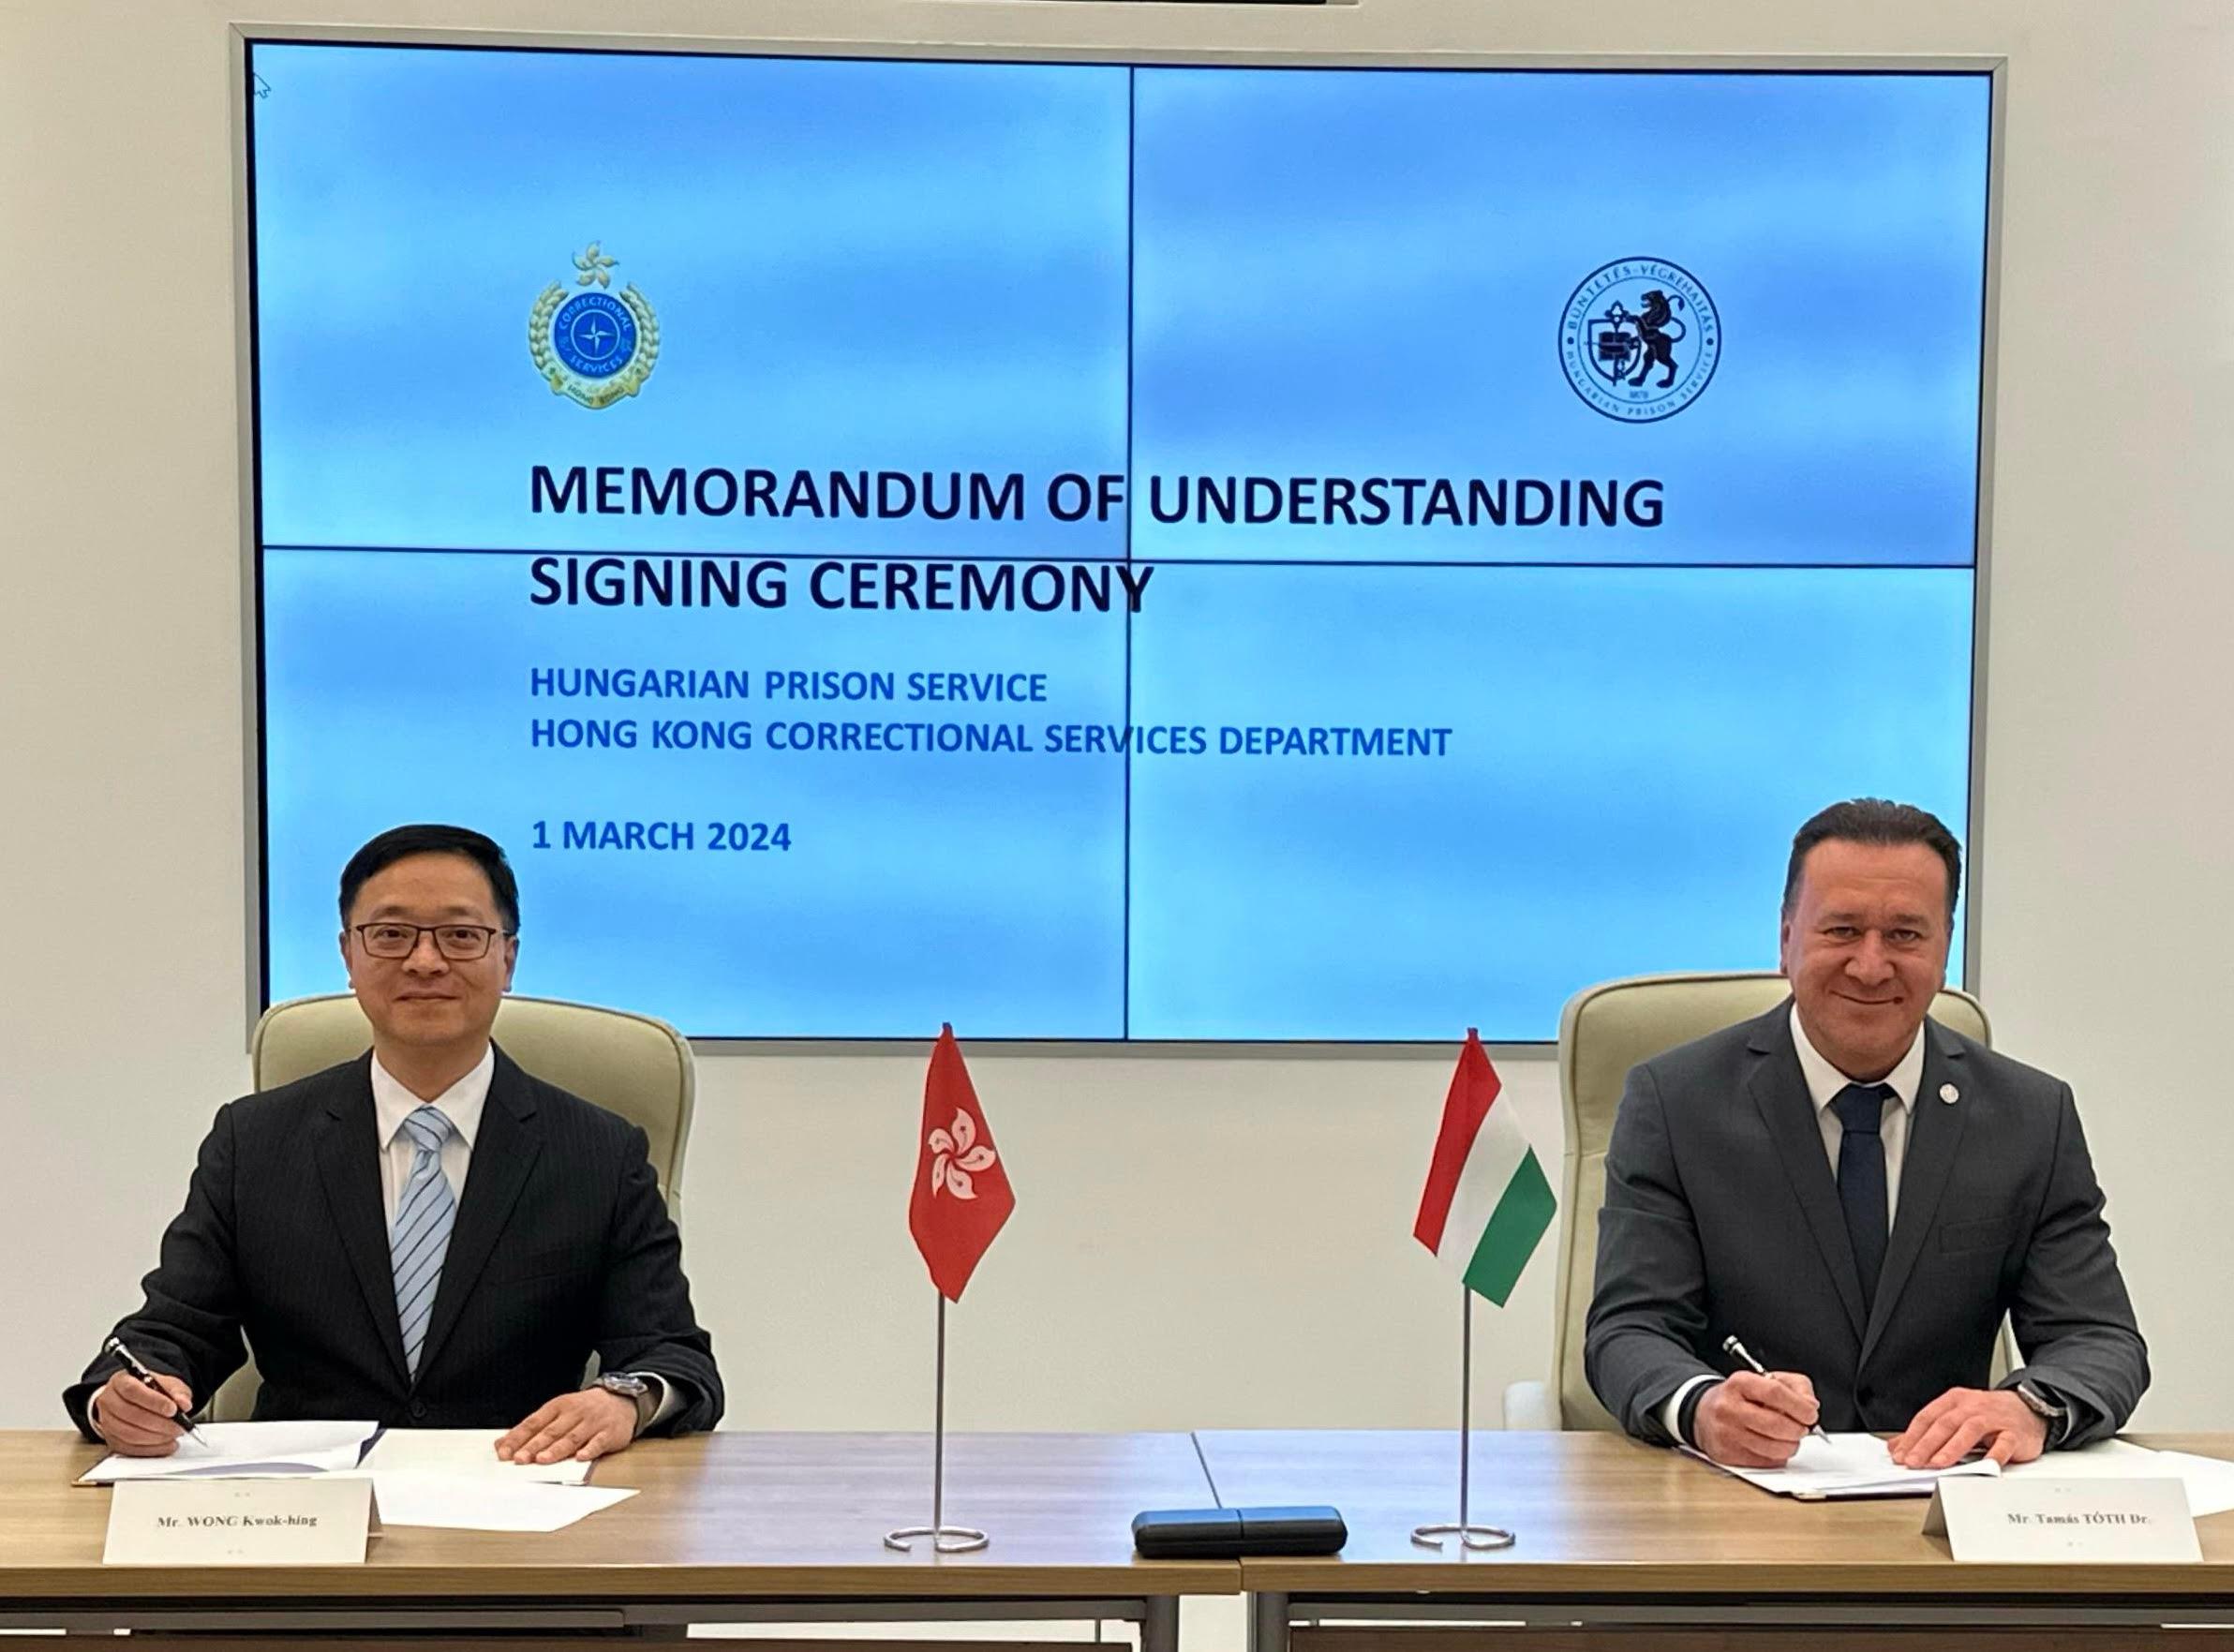 The Correctional Services Department and the Hungarian Prison Service signed a Memorandum of Understanding (MOU) today (March 1) to promote mutual exchanges and co-operation on correctional services. The MOU was signed in Hungary by the Commissioner of Correctional Services, Mr Wong Kwok-hing (left), and the Director General of the Hungarian Prison Service, Lieutenant General Dr Tamás Tóth (right).
